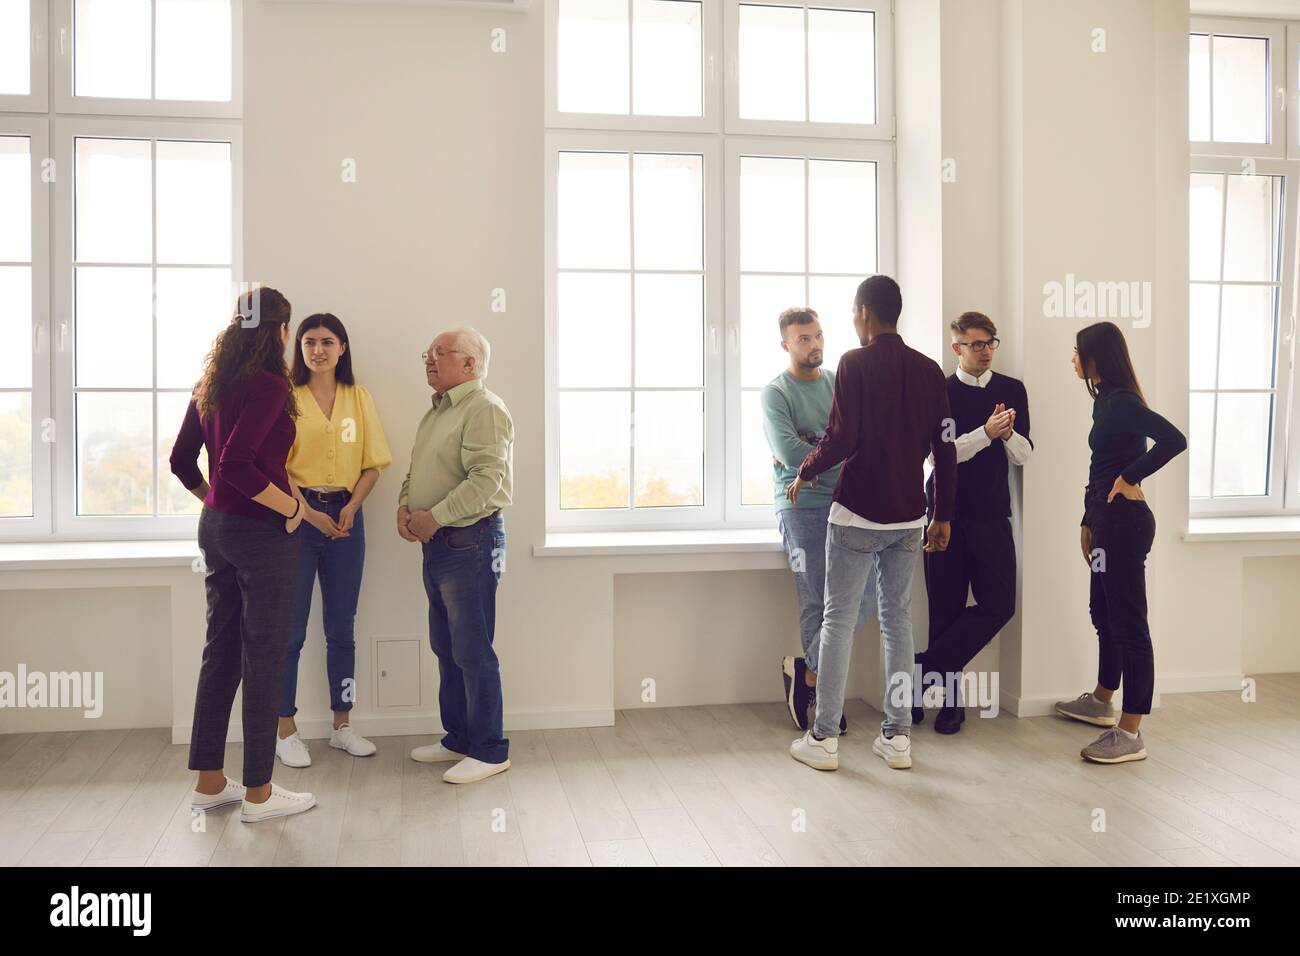 Diverse people meeting, getting to know each other and discussing problems together Stock Photo